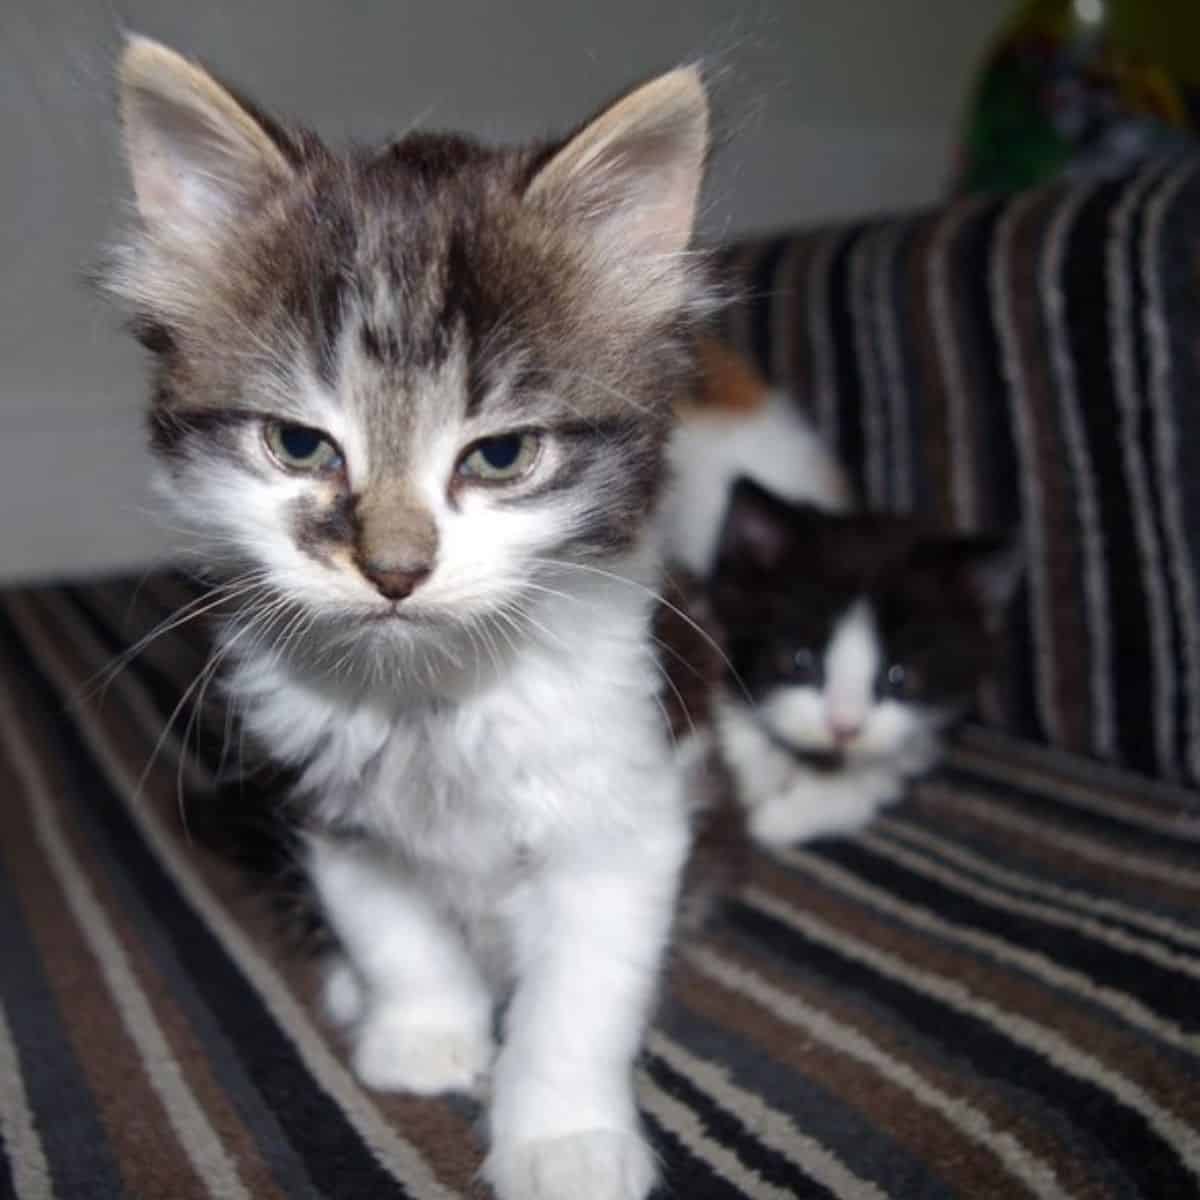 two angry kittens